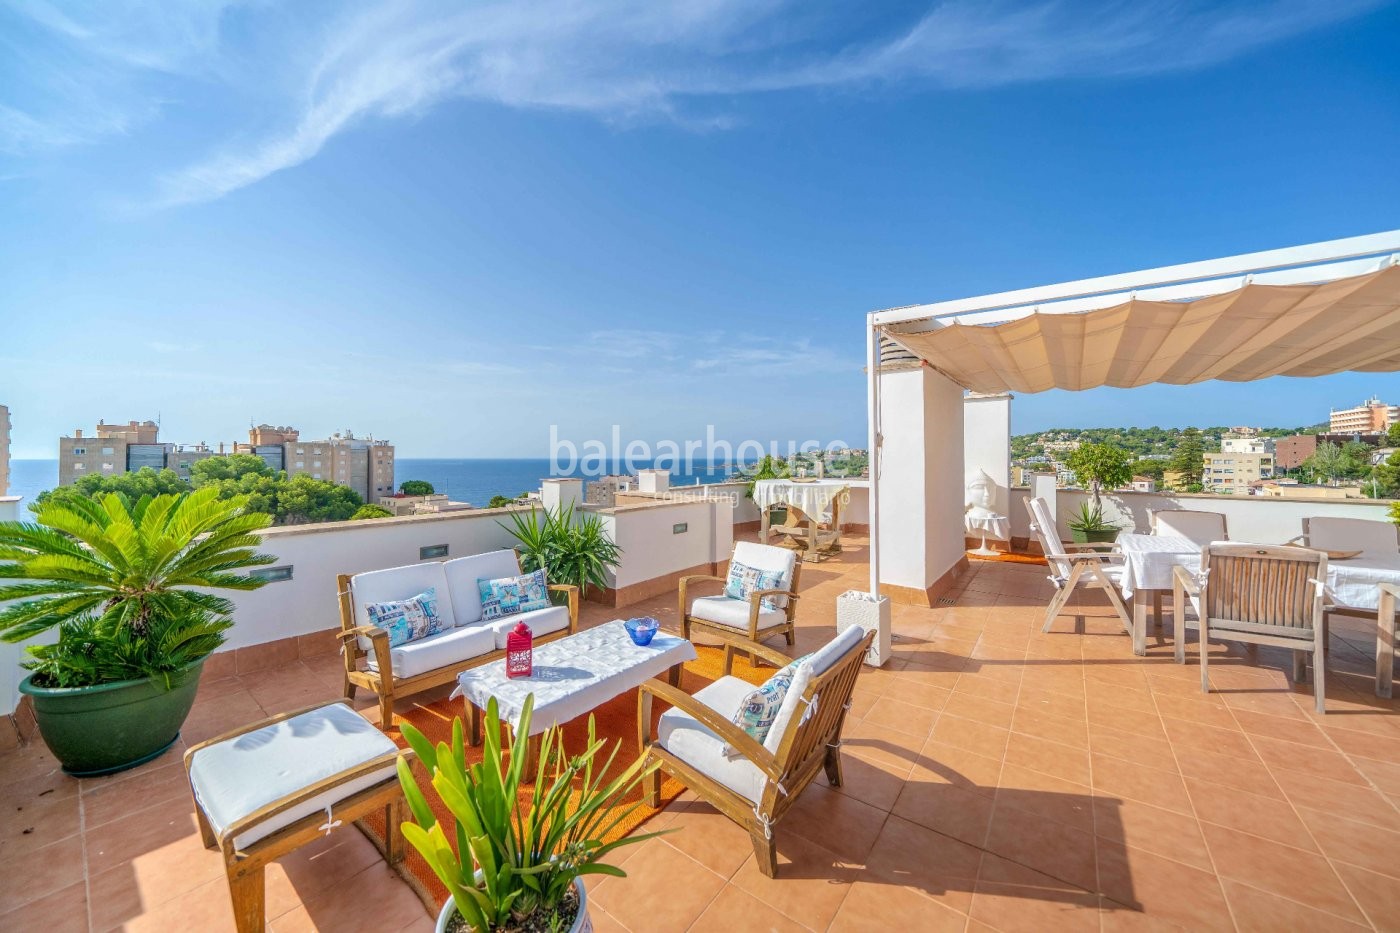 Magnificent penthouse in San Agustin full of light with private solarium and splendid sea views.